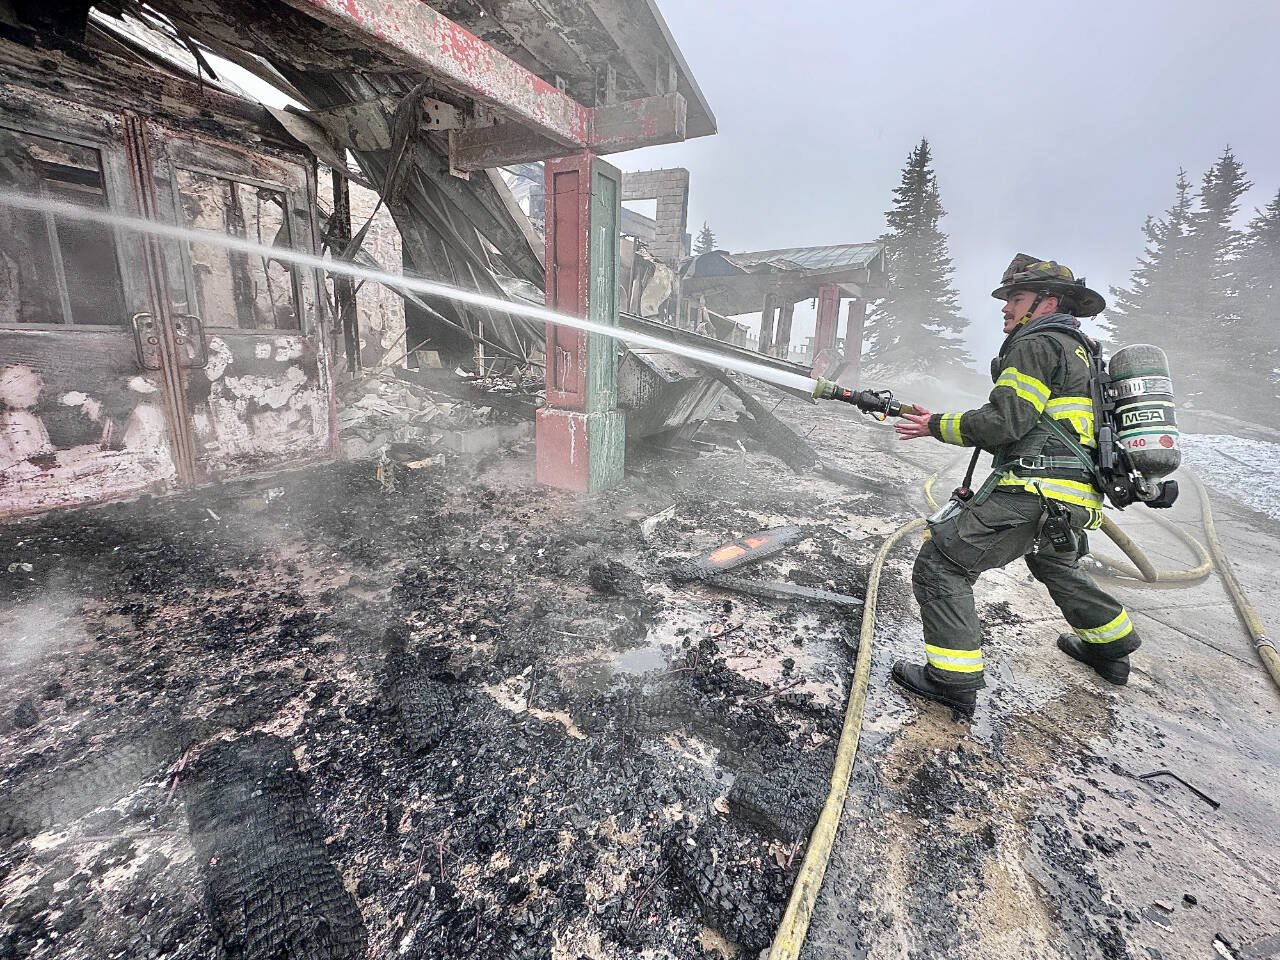 Photo by Jay Cline/Clallam County Fire District 2
Firefighters from Clallam 2 Fire-Rescue and the Port Angeles Fire Department tend to a fire at the Olympic National Park Day Lodge on May 7.